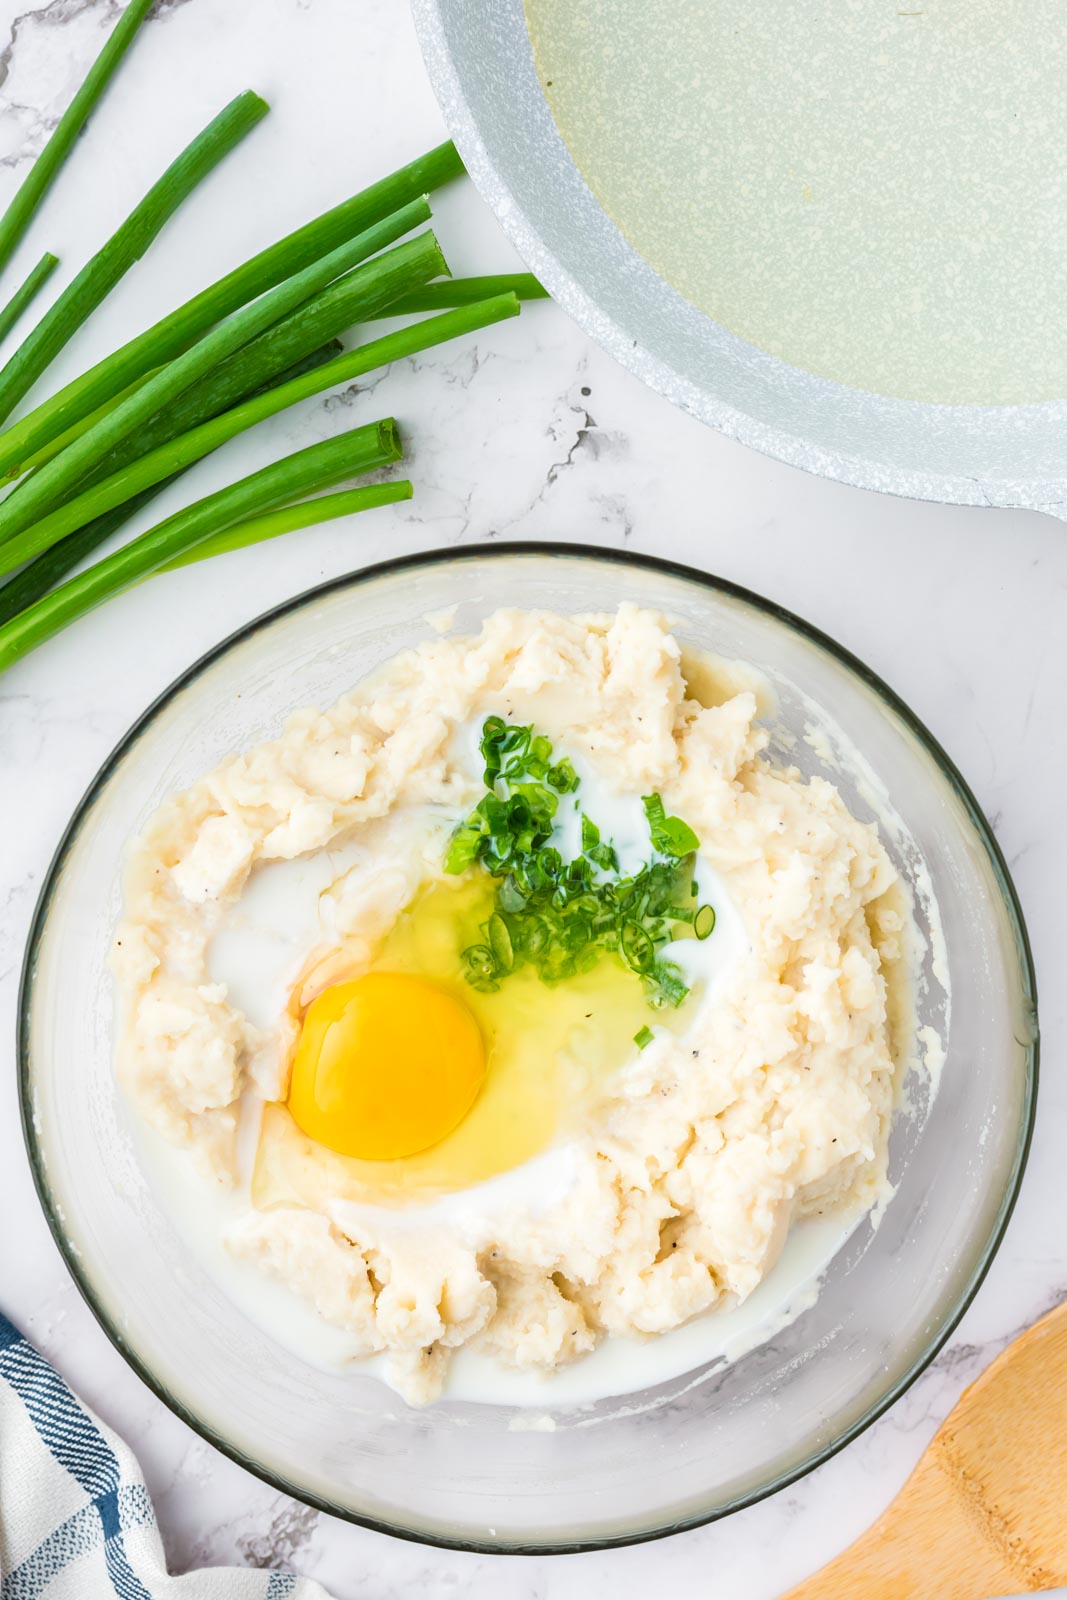 a bowl of mashed potatoes with an egg and green onions 